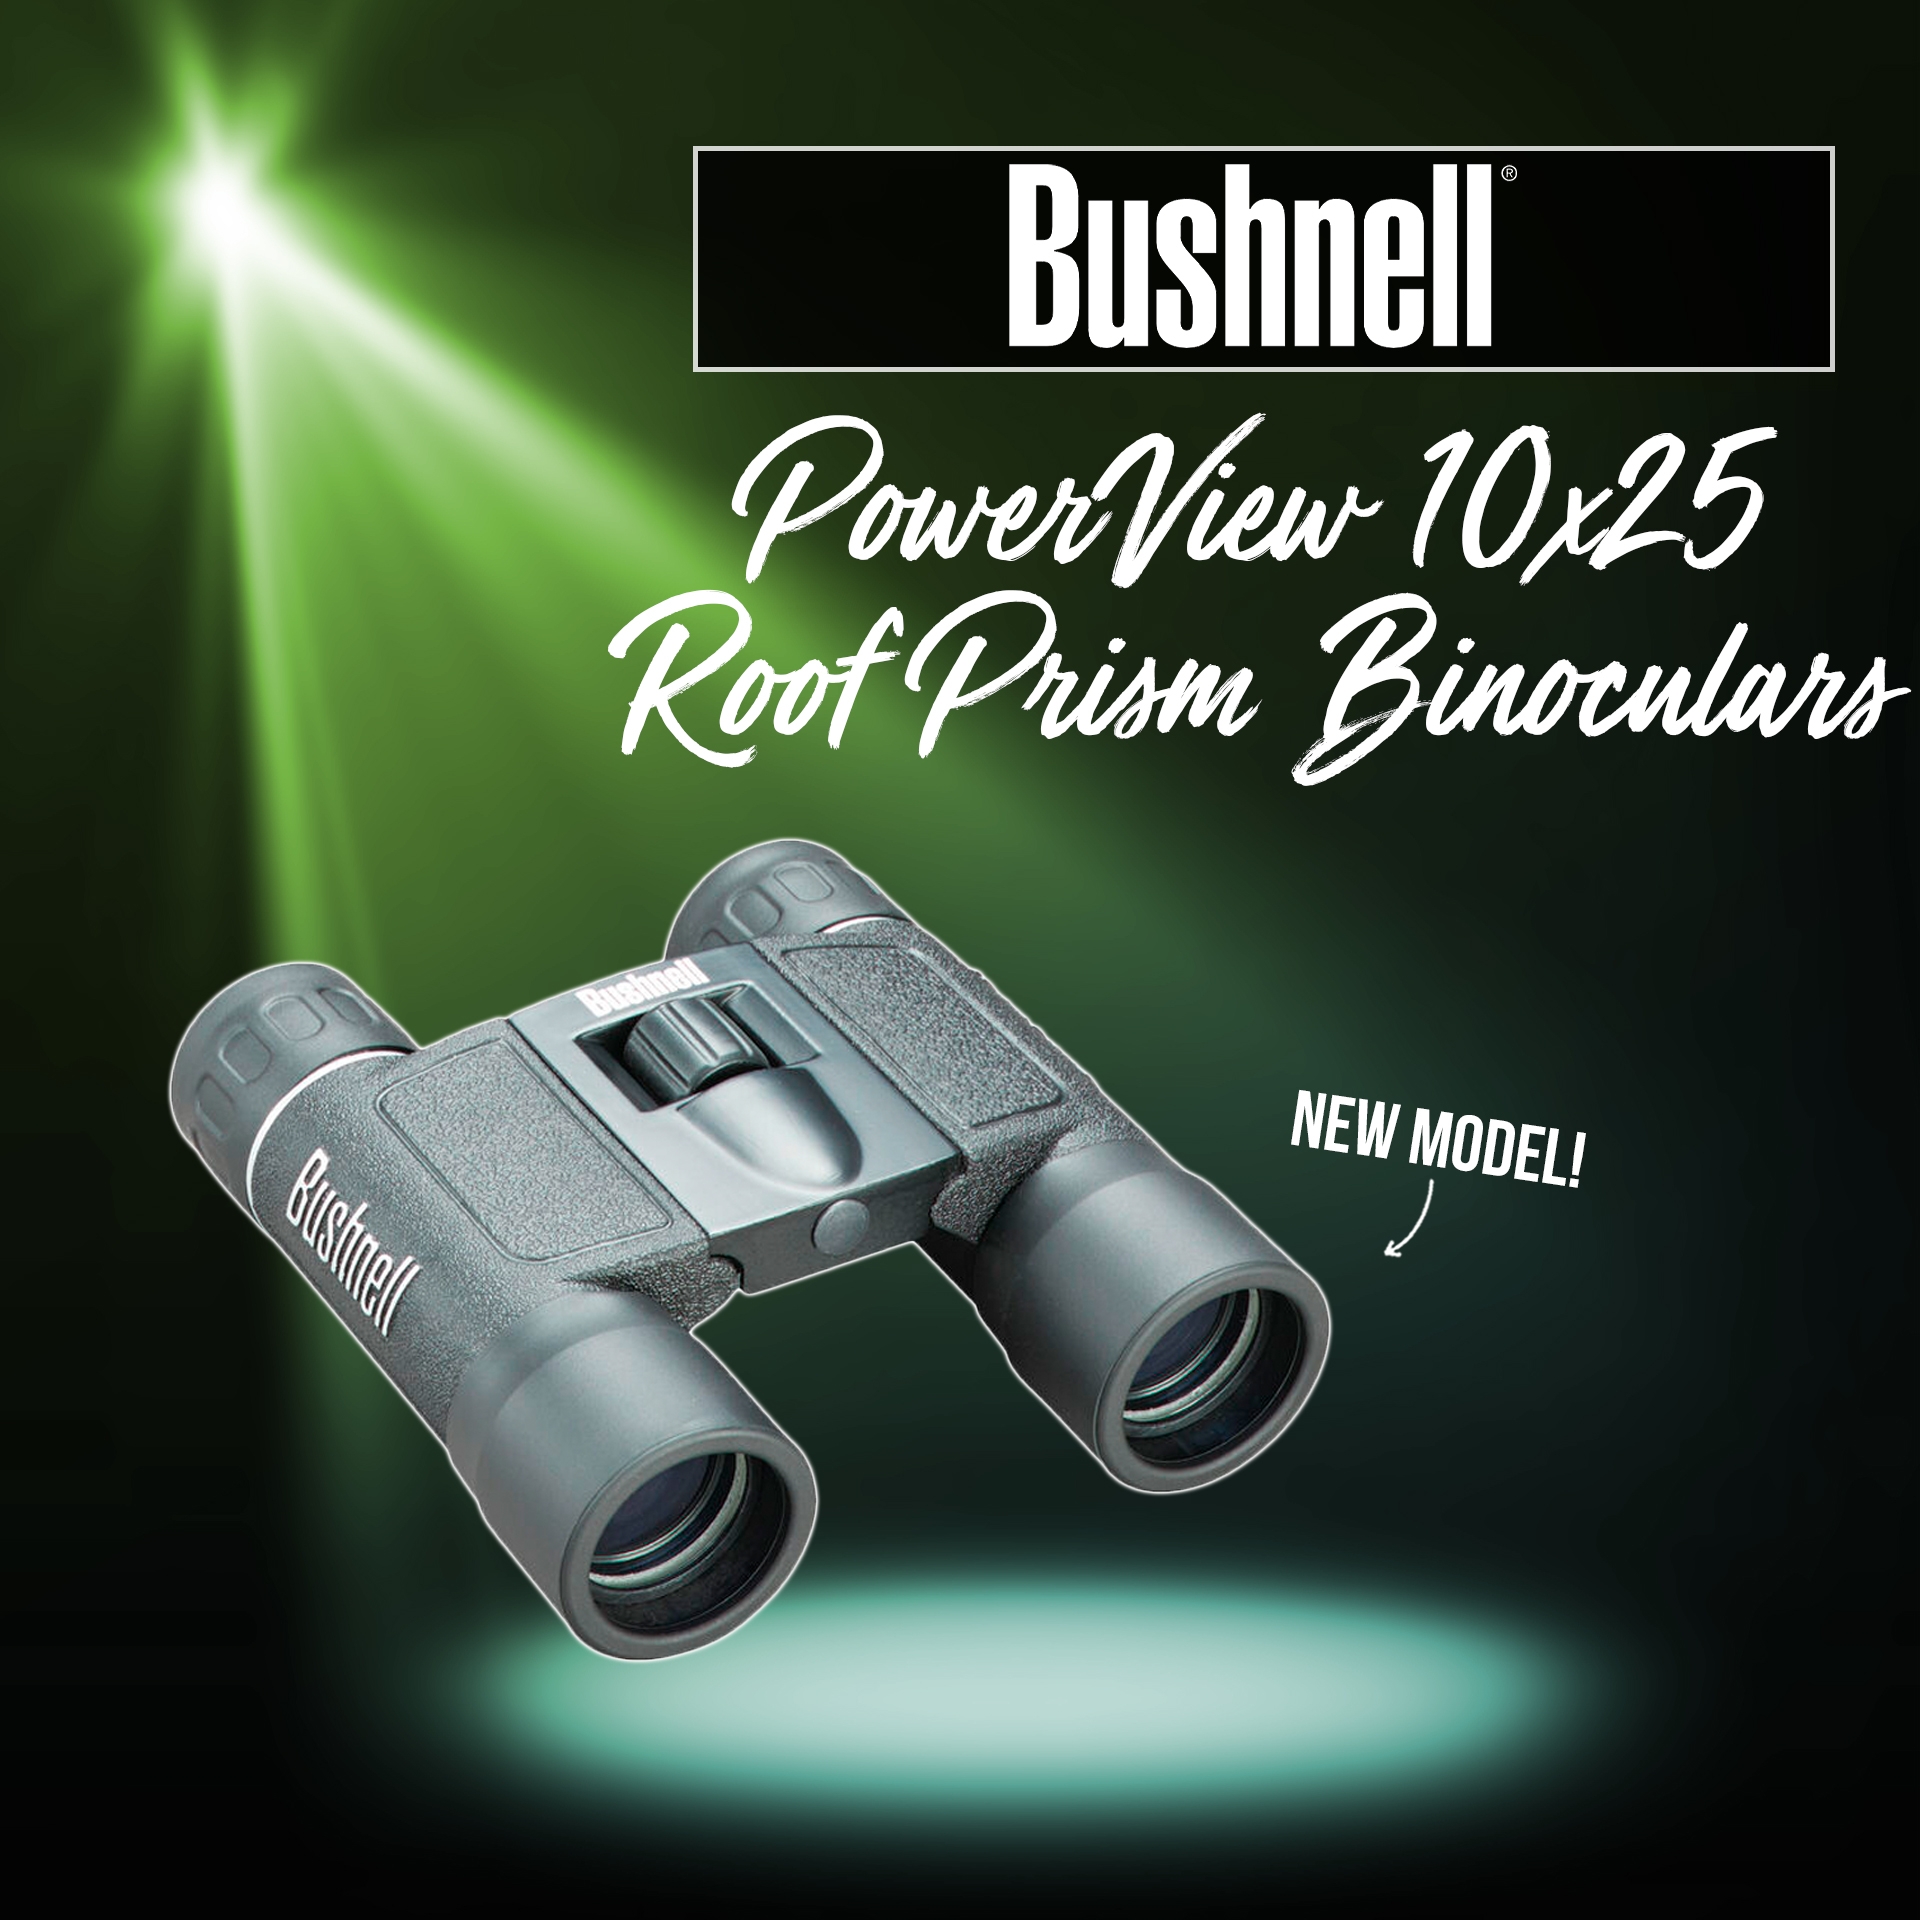 New - Bushnell PowerView 10x25 Roof Prism Binoculars